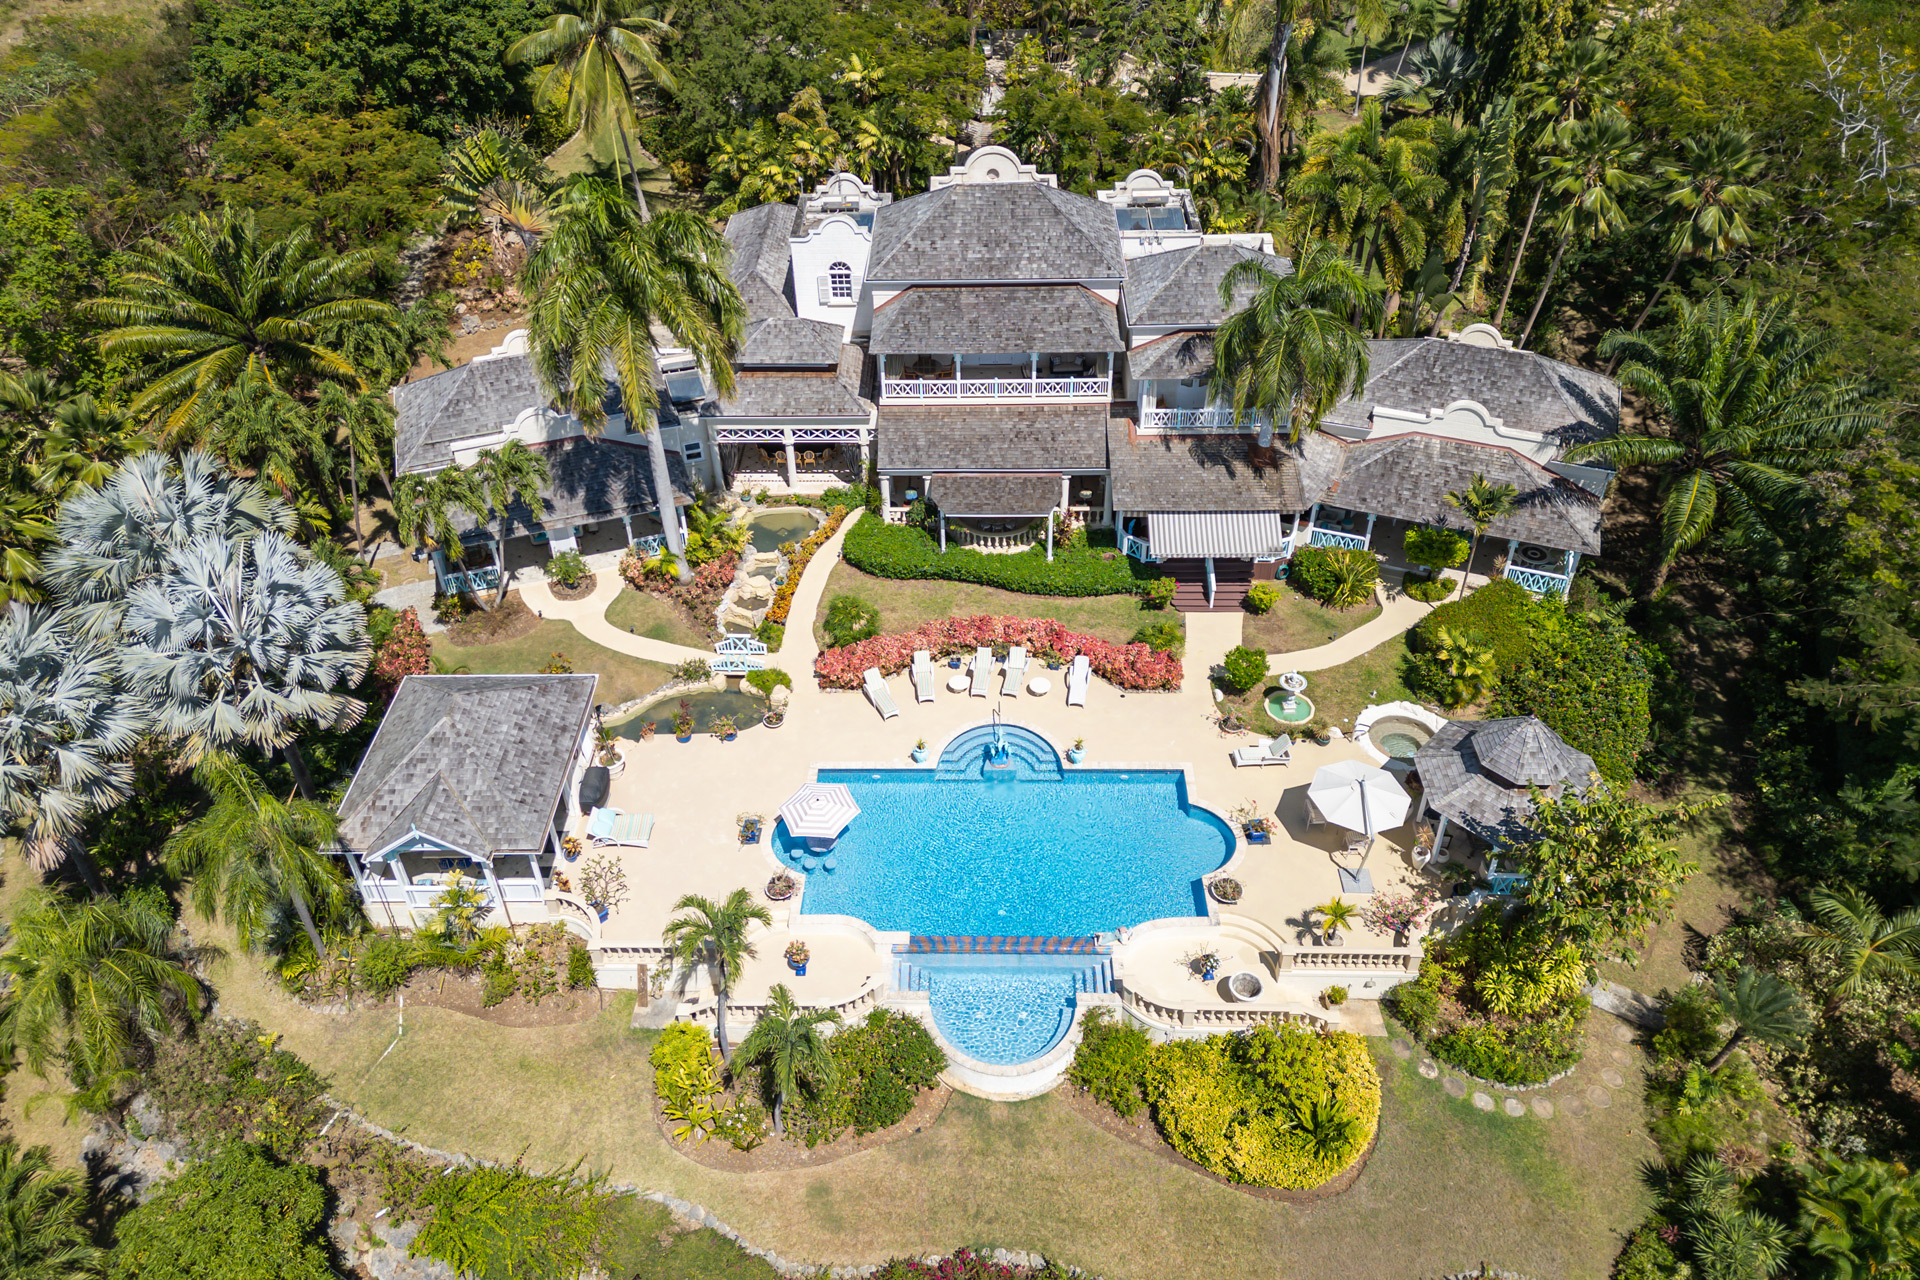 Sir Cliff Richard’s Barbados Home Is Up For Sale